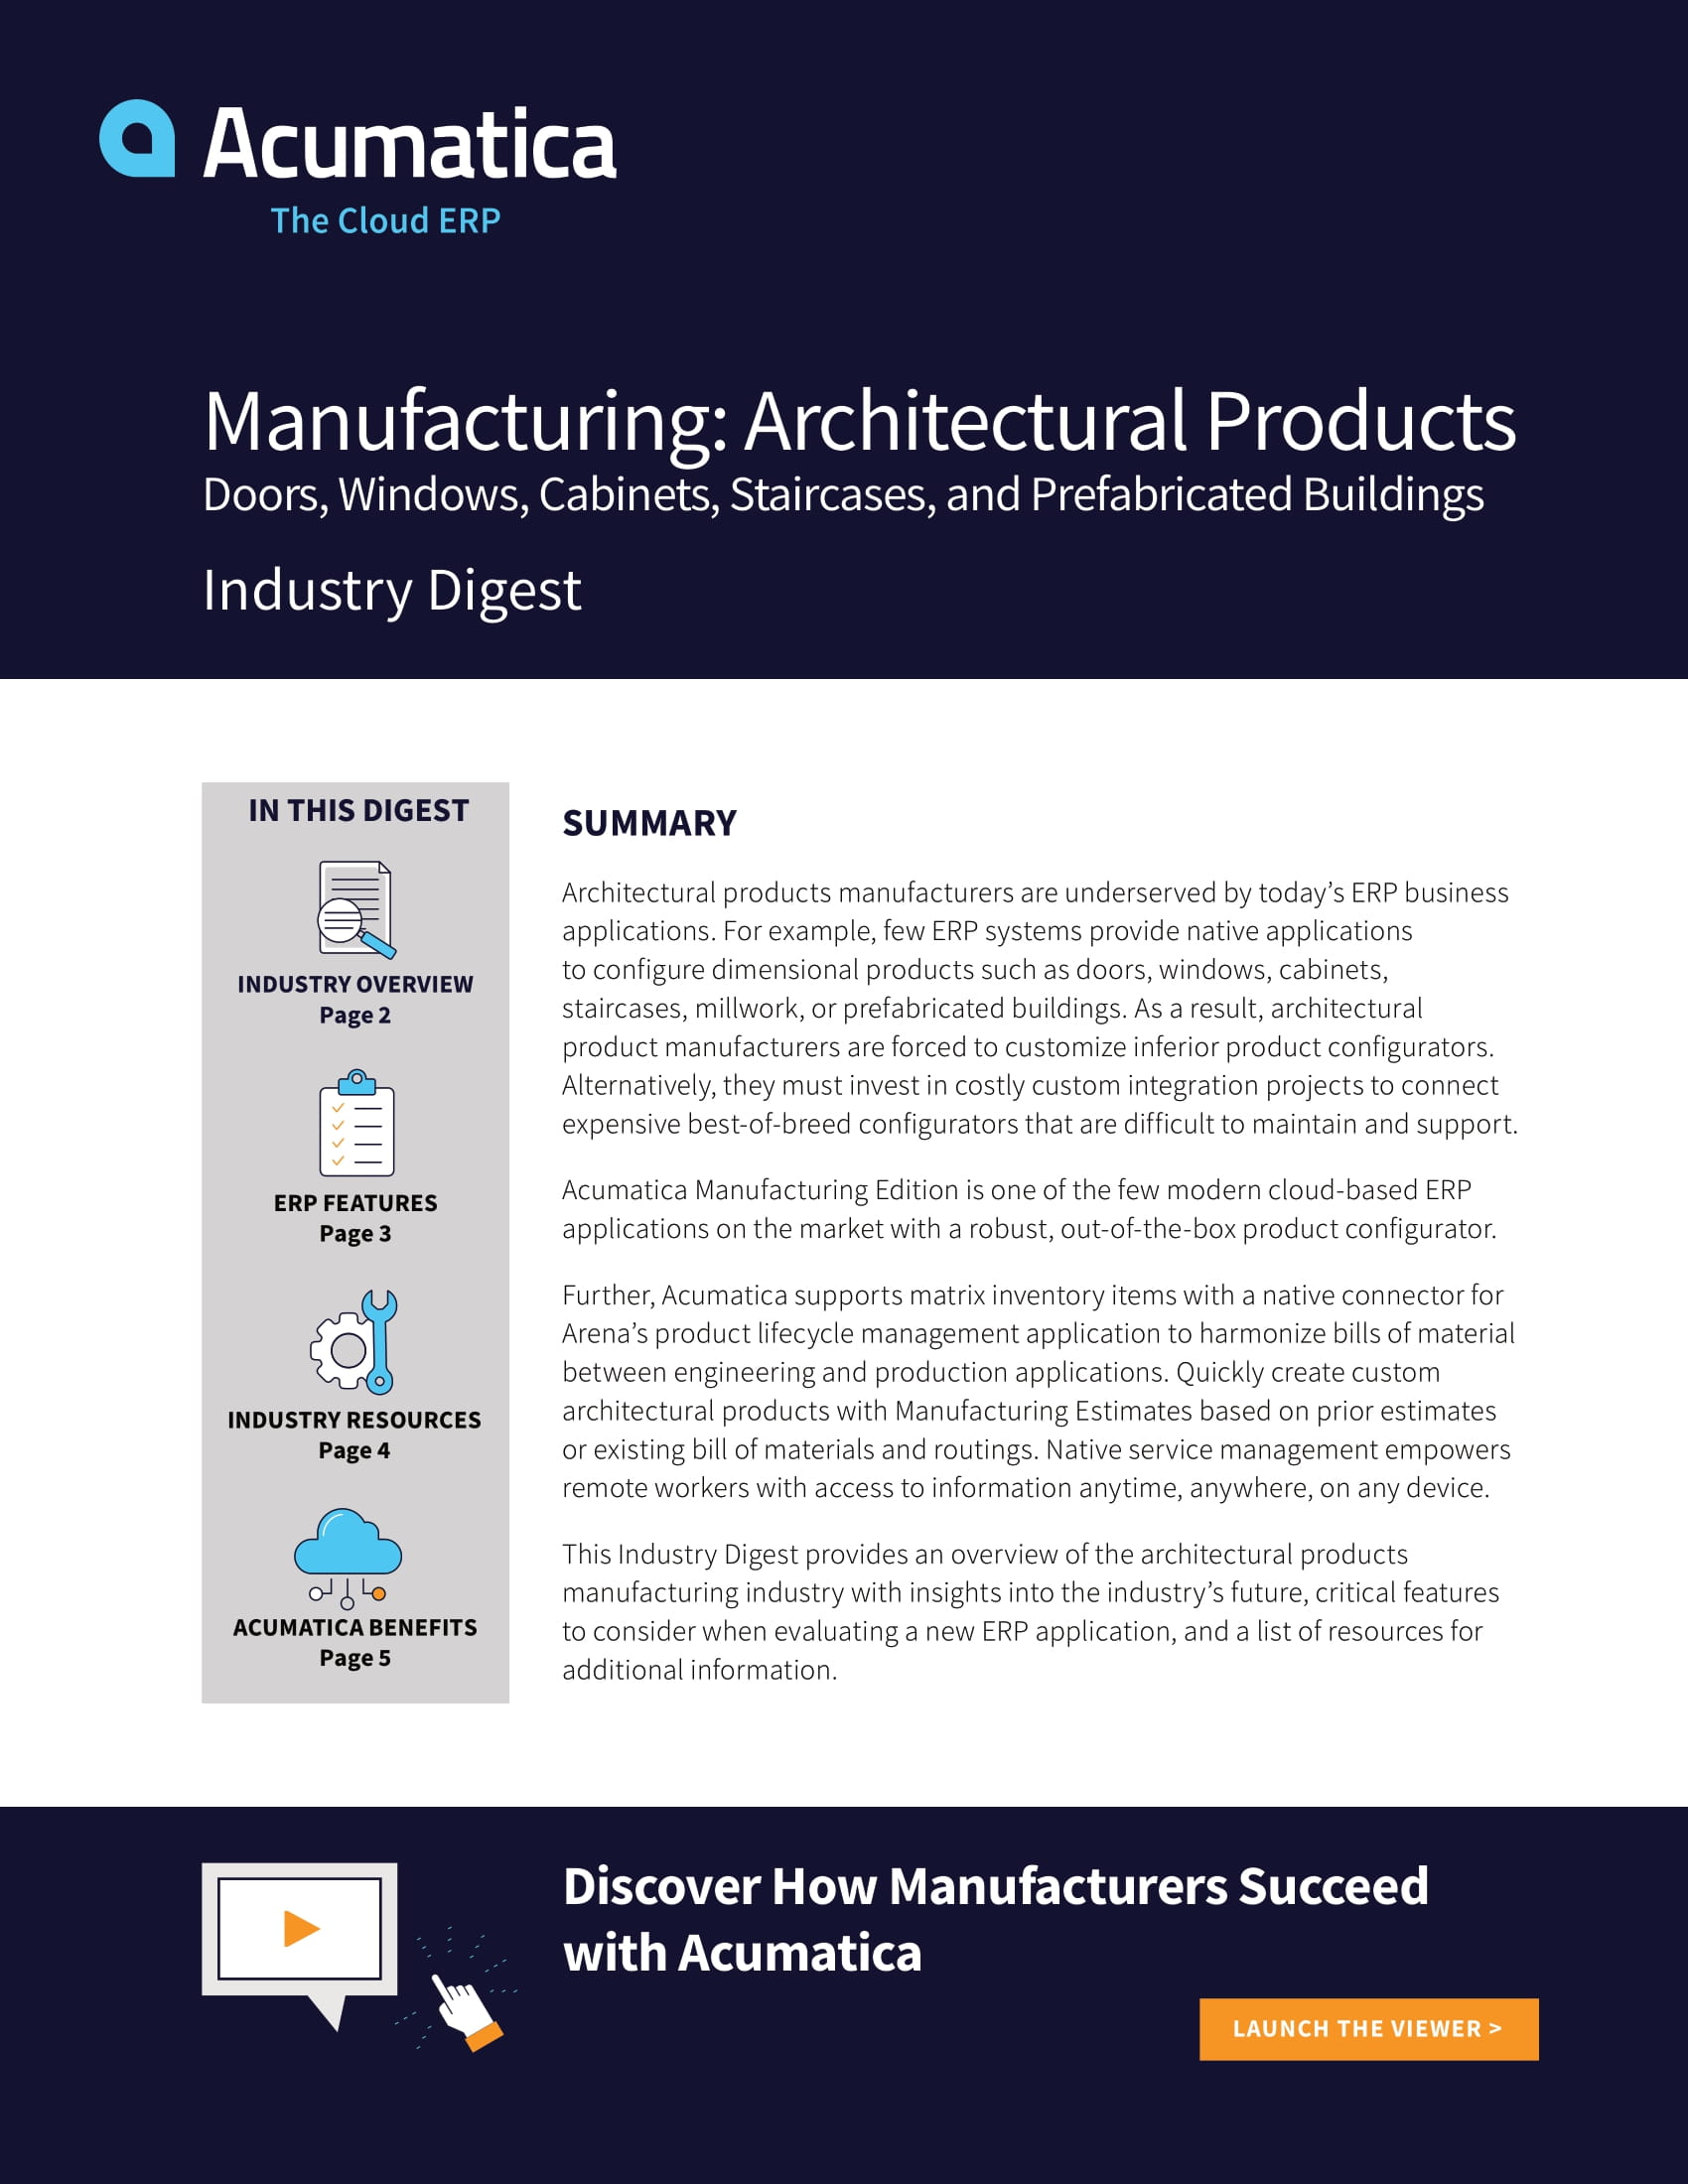 Discover the Right ERP for Architectural Products Manufacturers